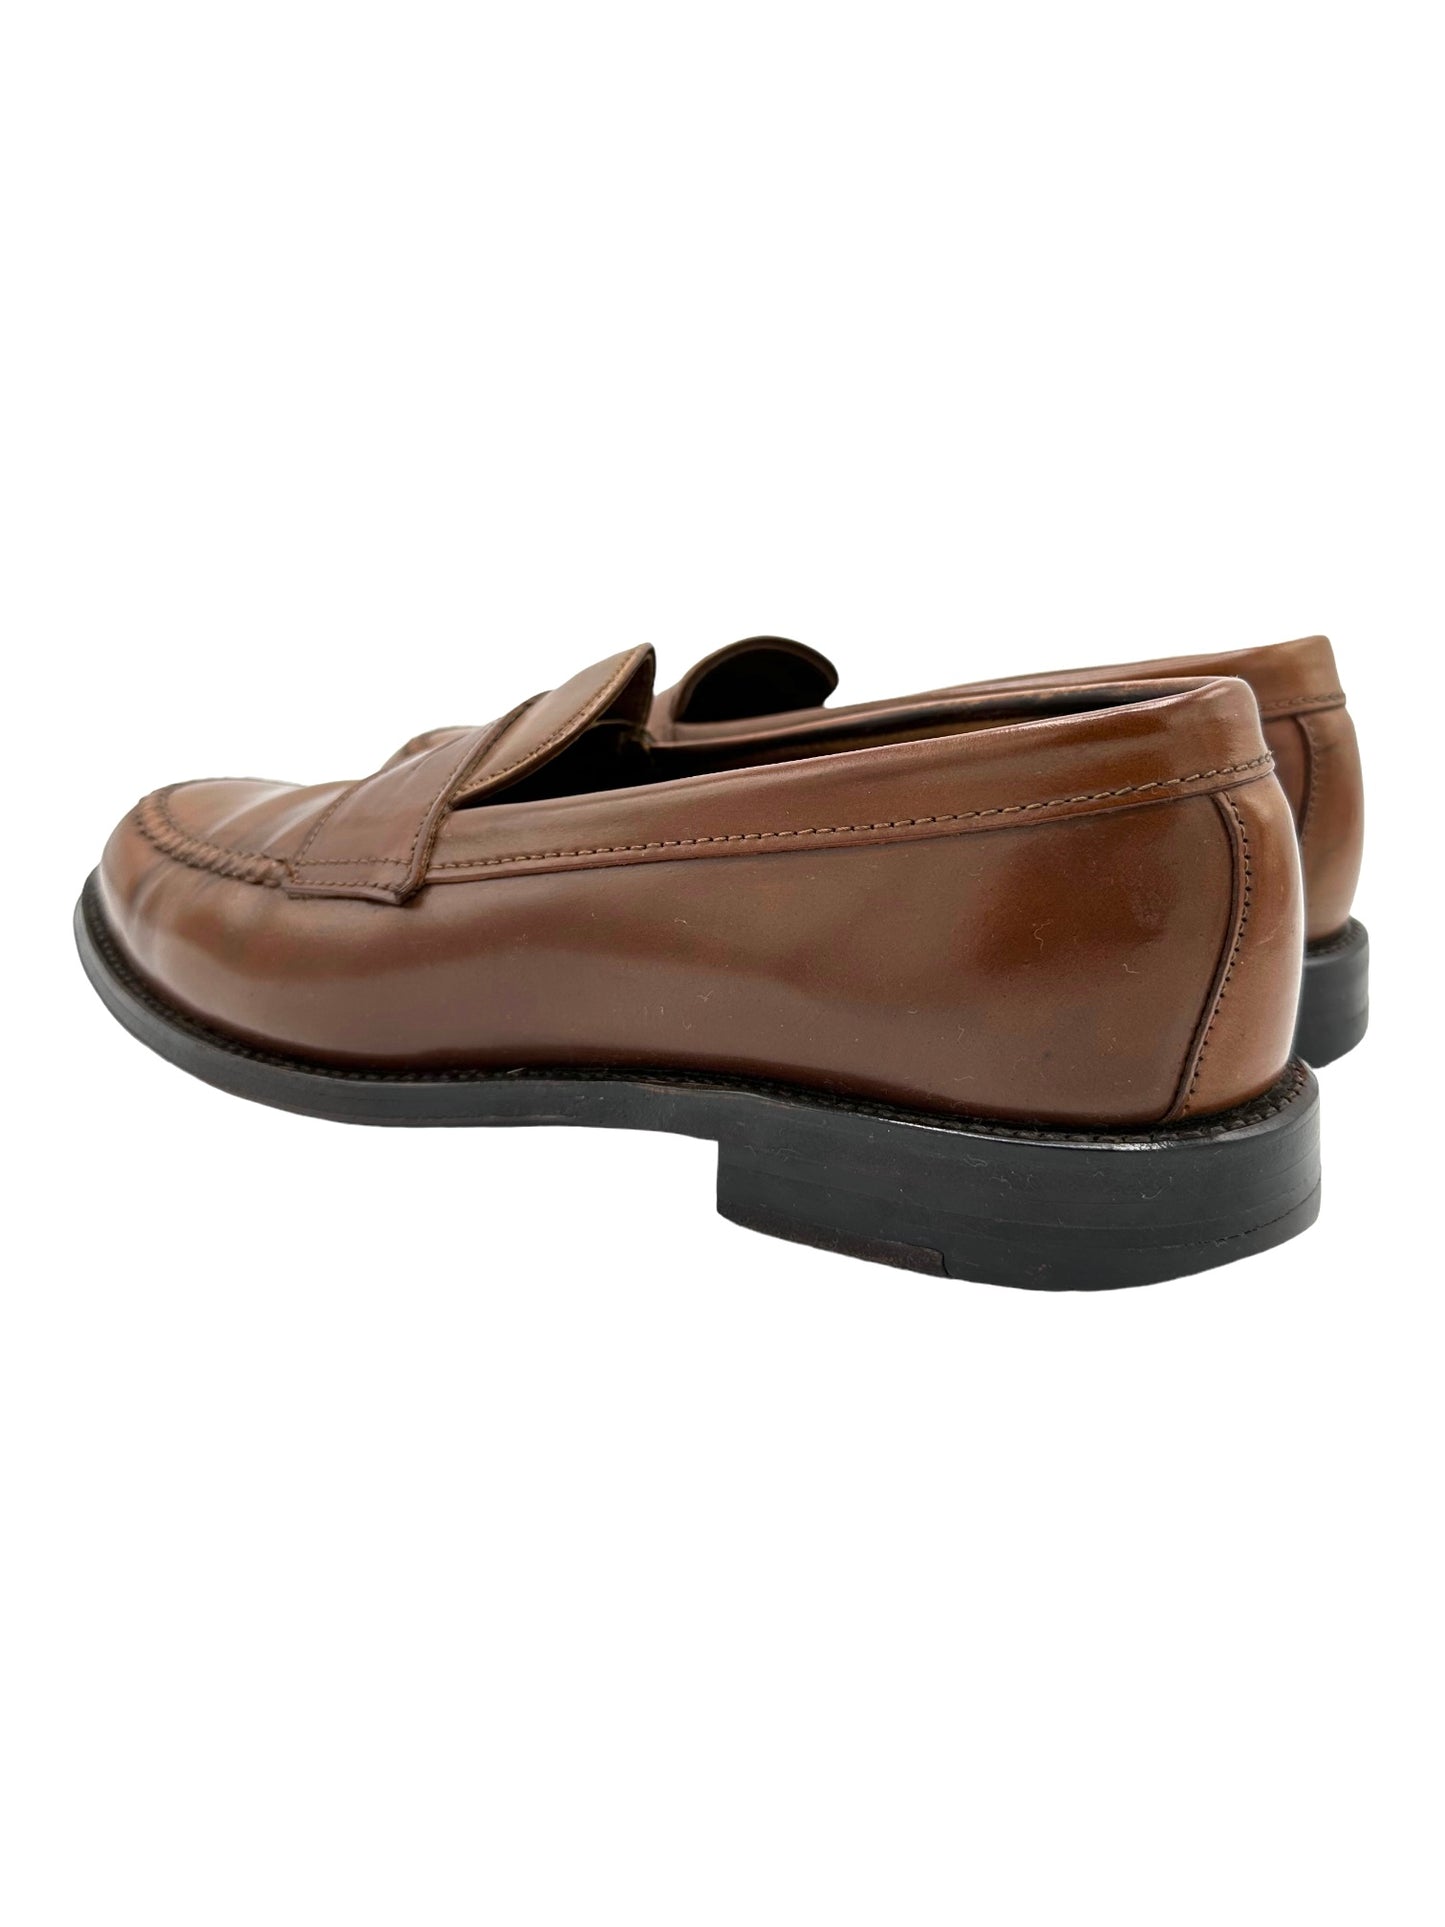 Alden Tan Shell Cordovan Penny Loafers